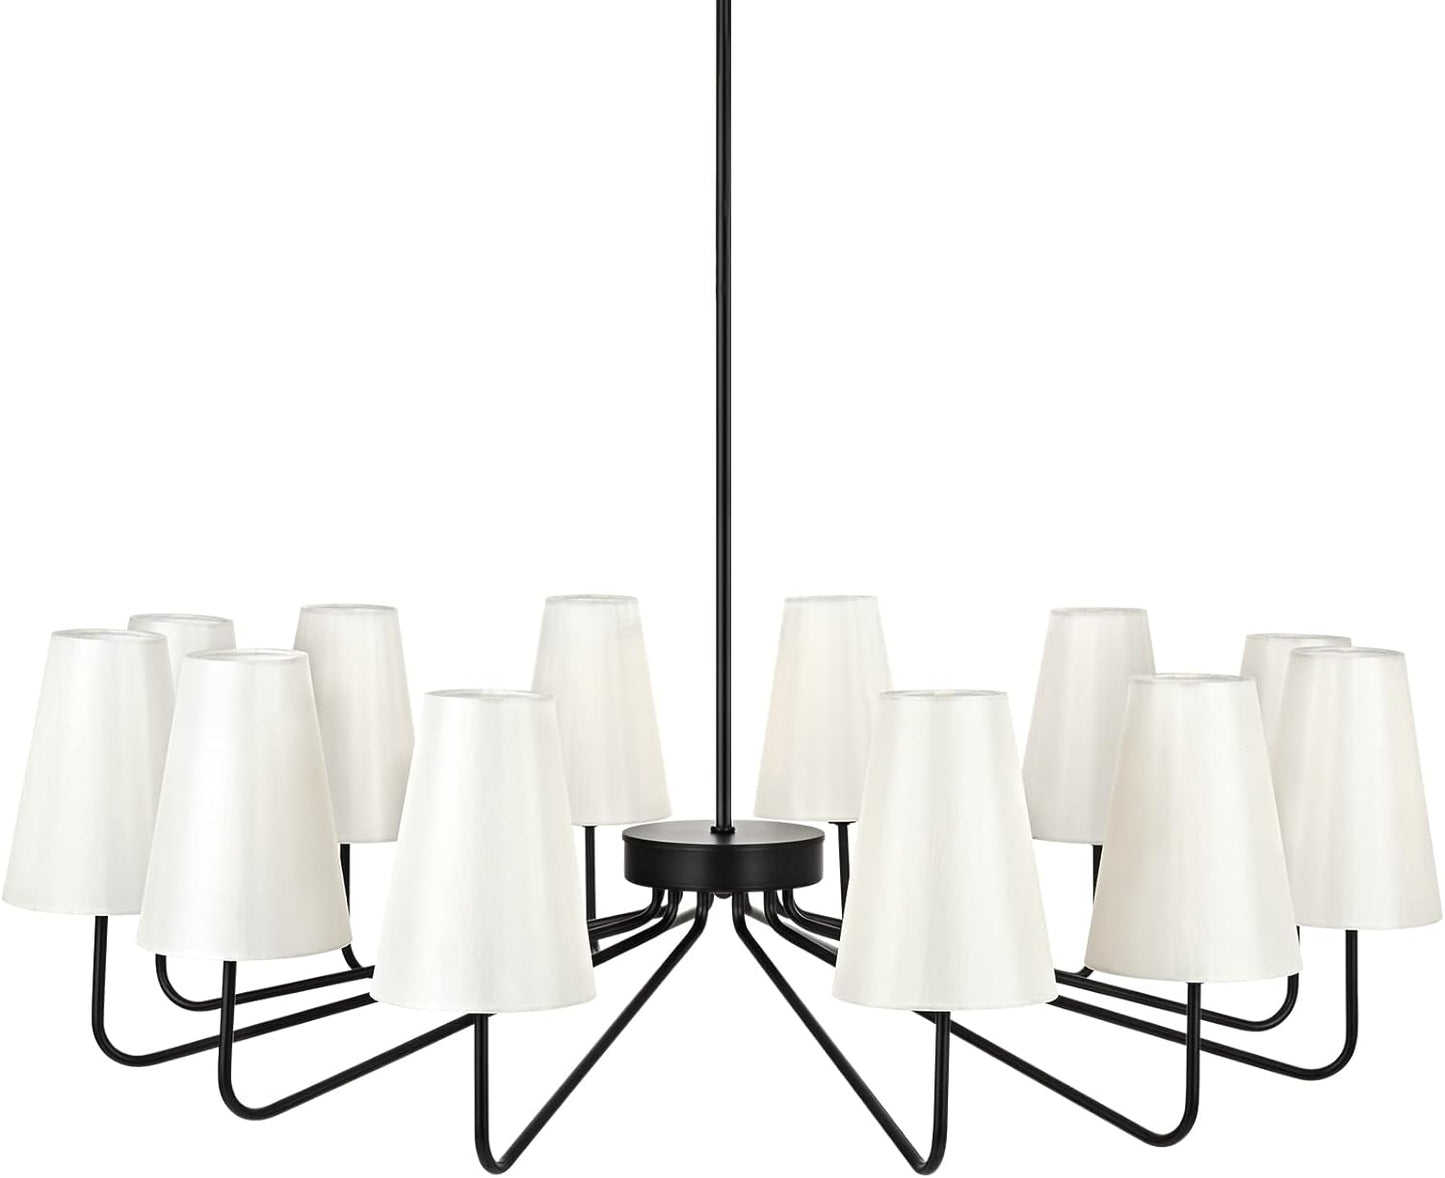 Peblto Metal Black Chandeliers with Fabric Shades, 12-Light Modern Farmhouse Chandelier, Dining Room Light Fixture for Living Room, Bedroom, Foyer, Entryway, Sta